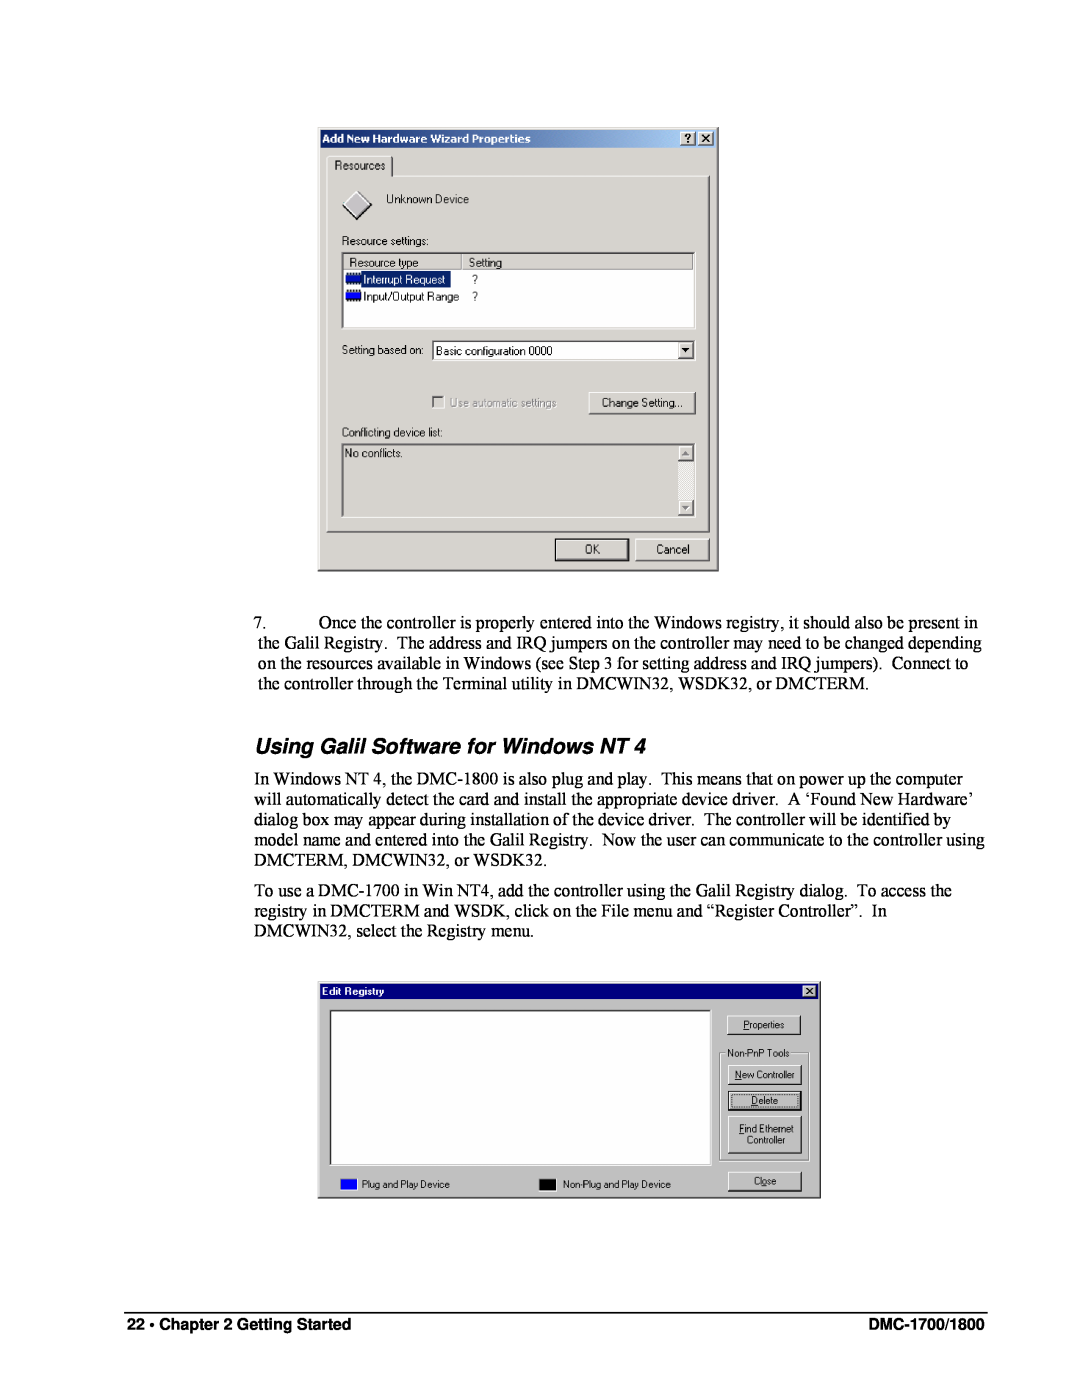 Galil DMC-1800, DMC-1700 user manual Using Galil Software for Windows NT, Getting Started 